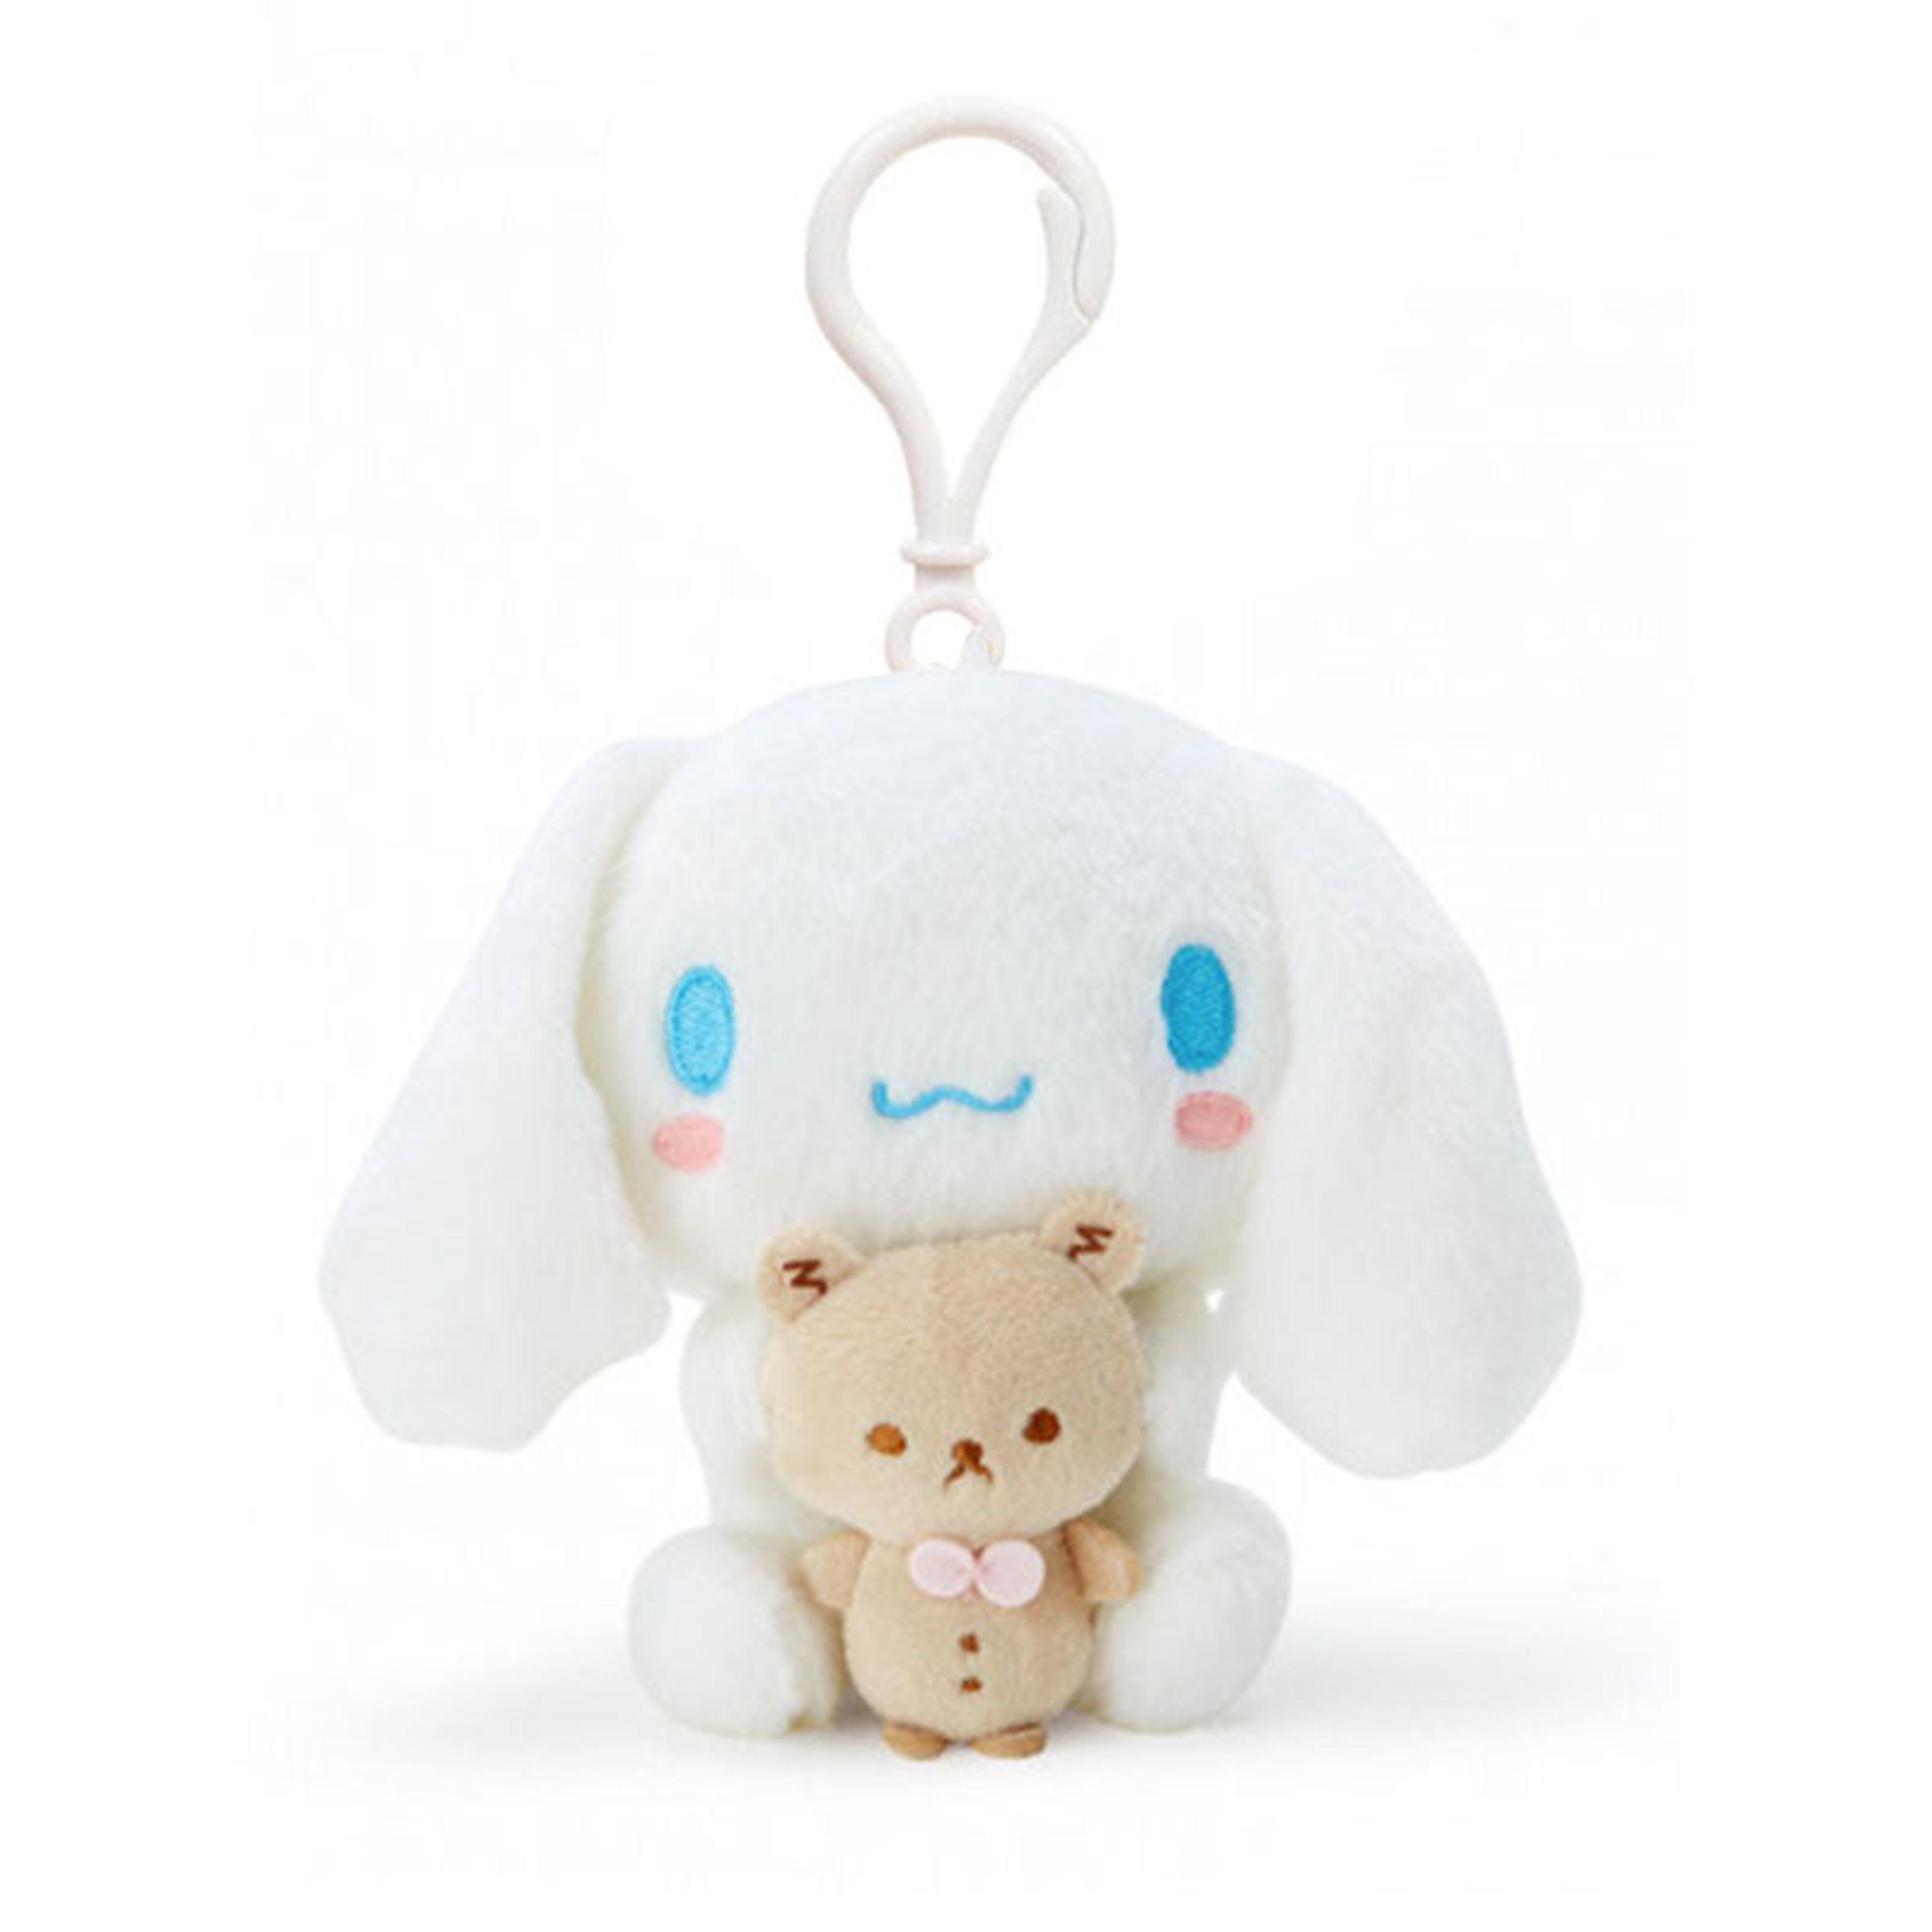 Alternate View 4 of Sanrio With Friend Clip On Mascot